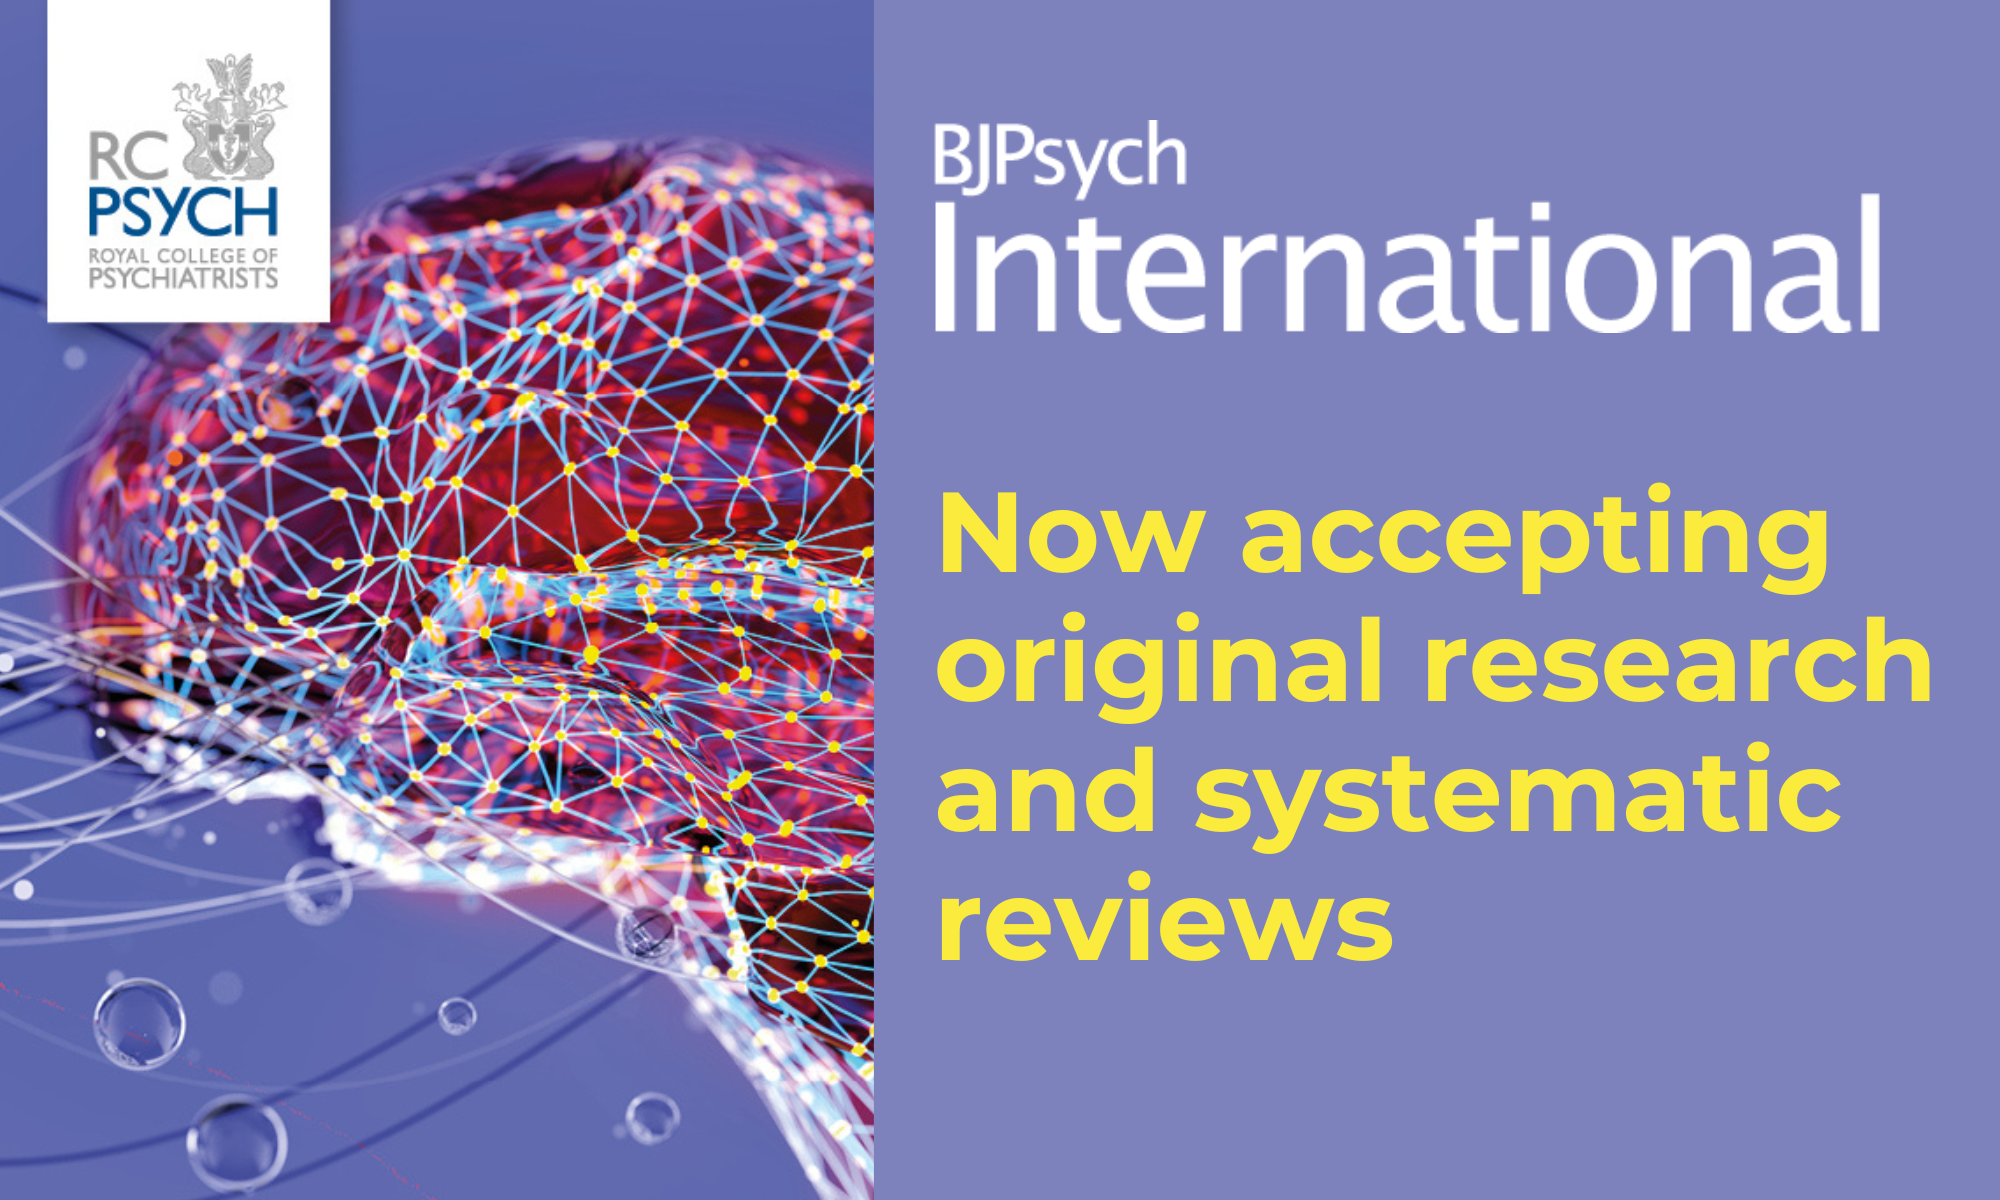 BJPsych International is now accepting original research and systematic reviews